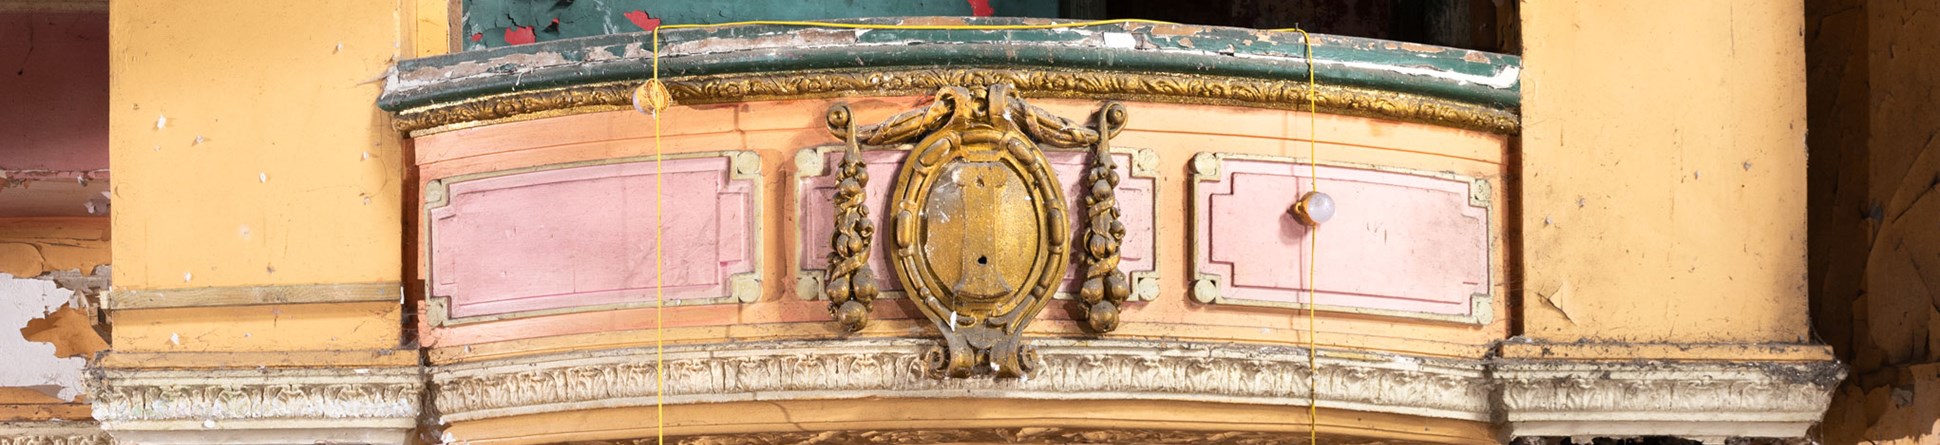 Detail of an ornate but derelict theatre interior, a balcony front with decorative moulding, flanked by columns.